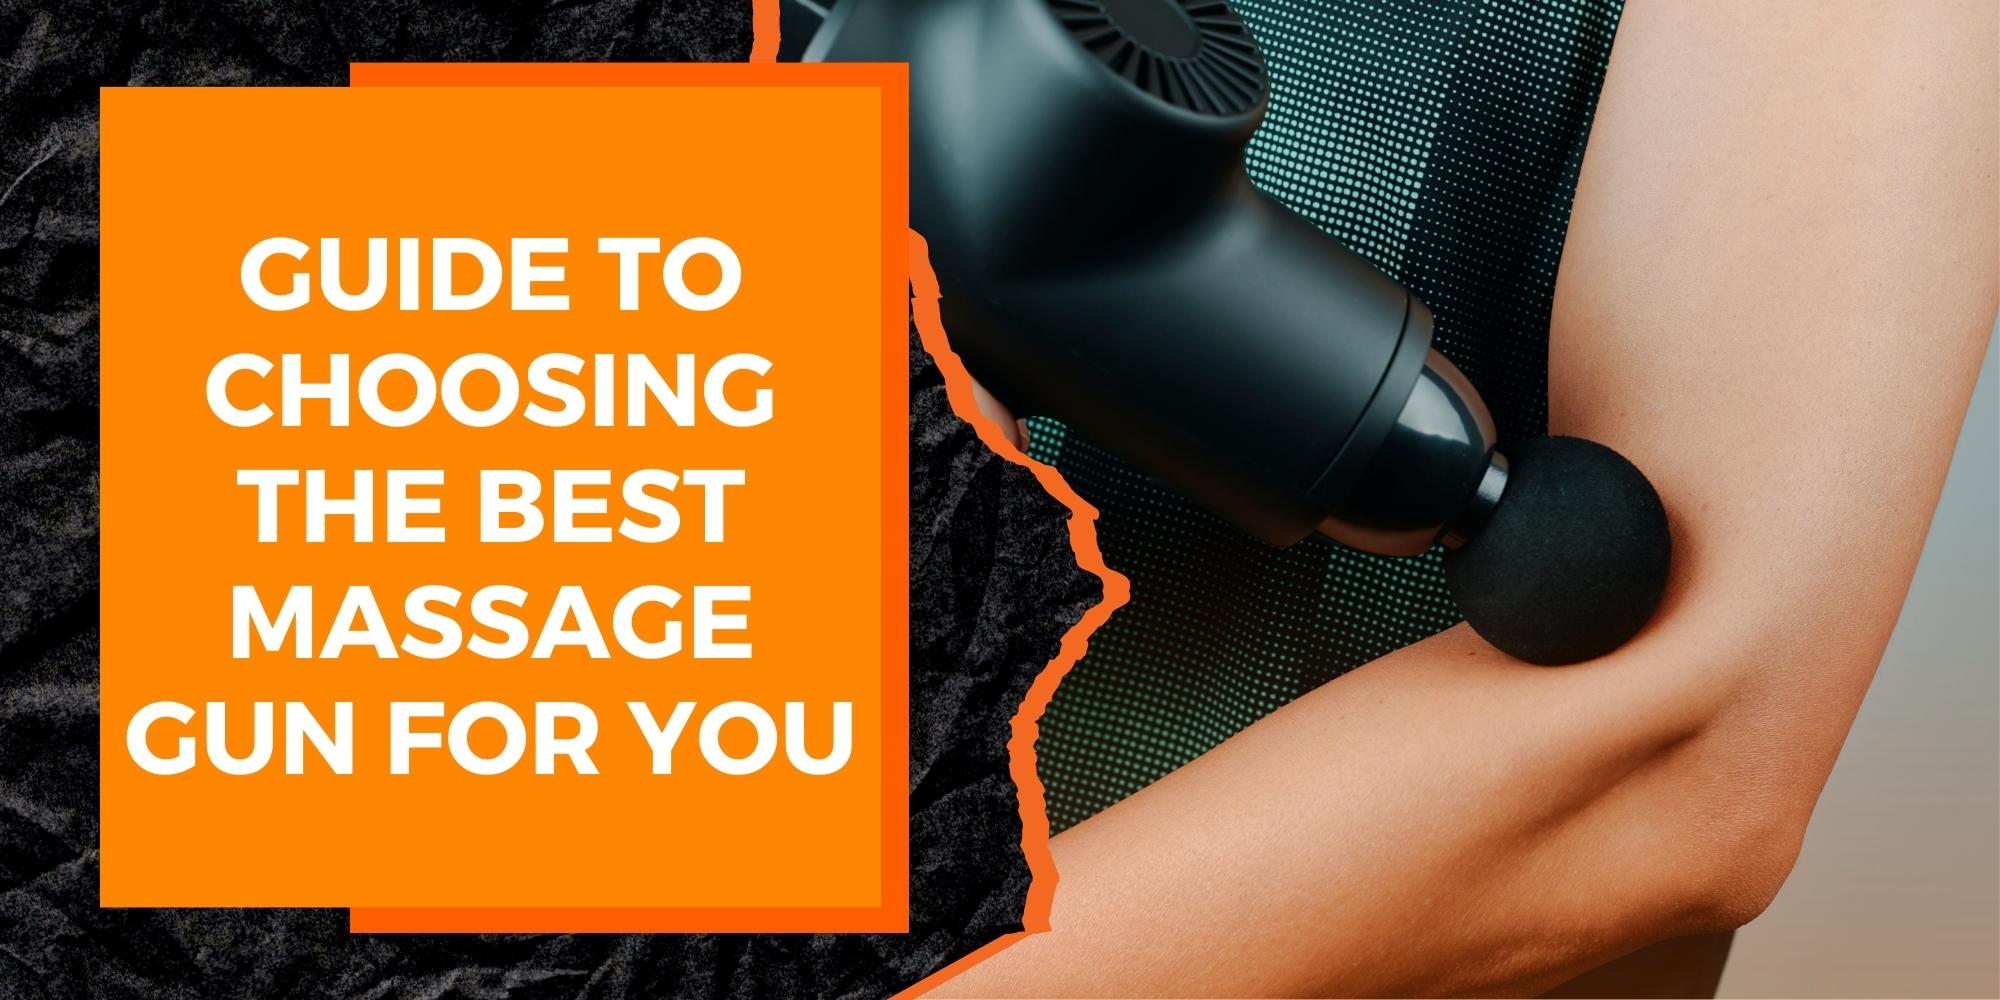 A Guide to Choosing the Best Massage Gun for You